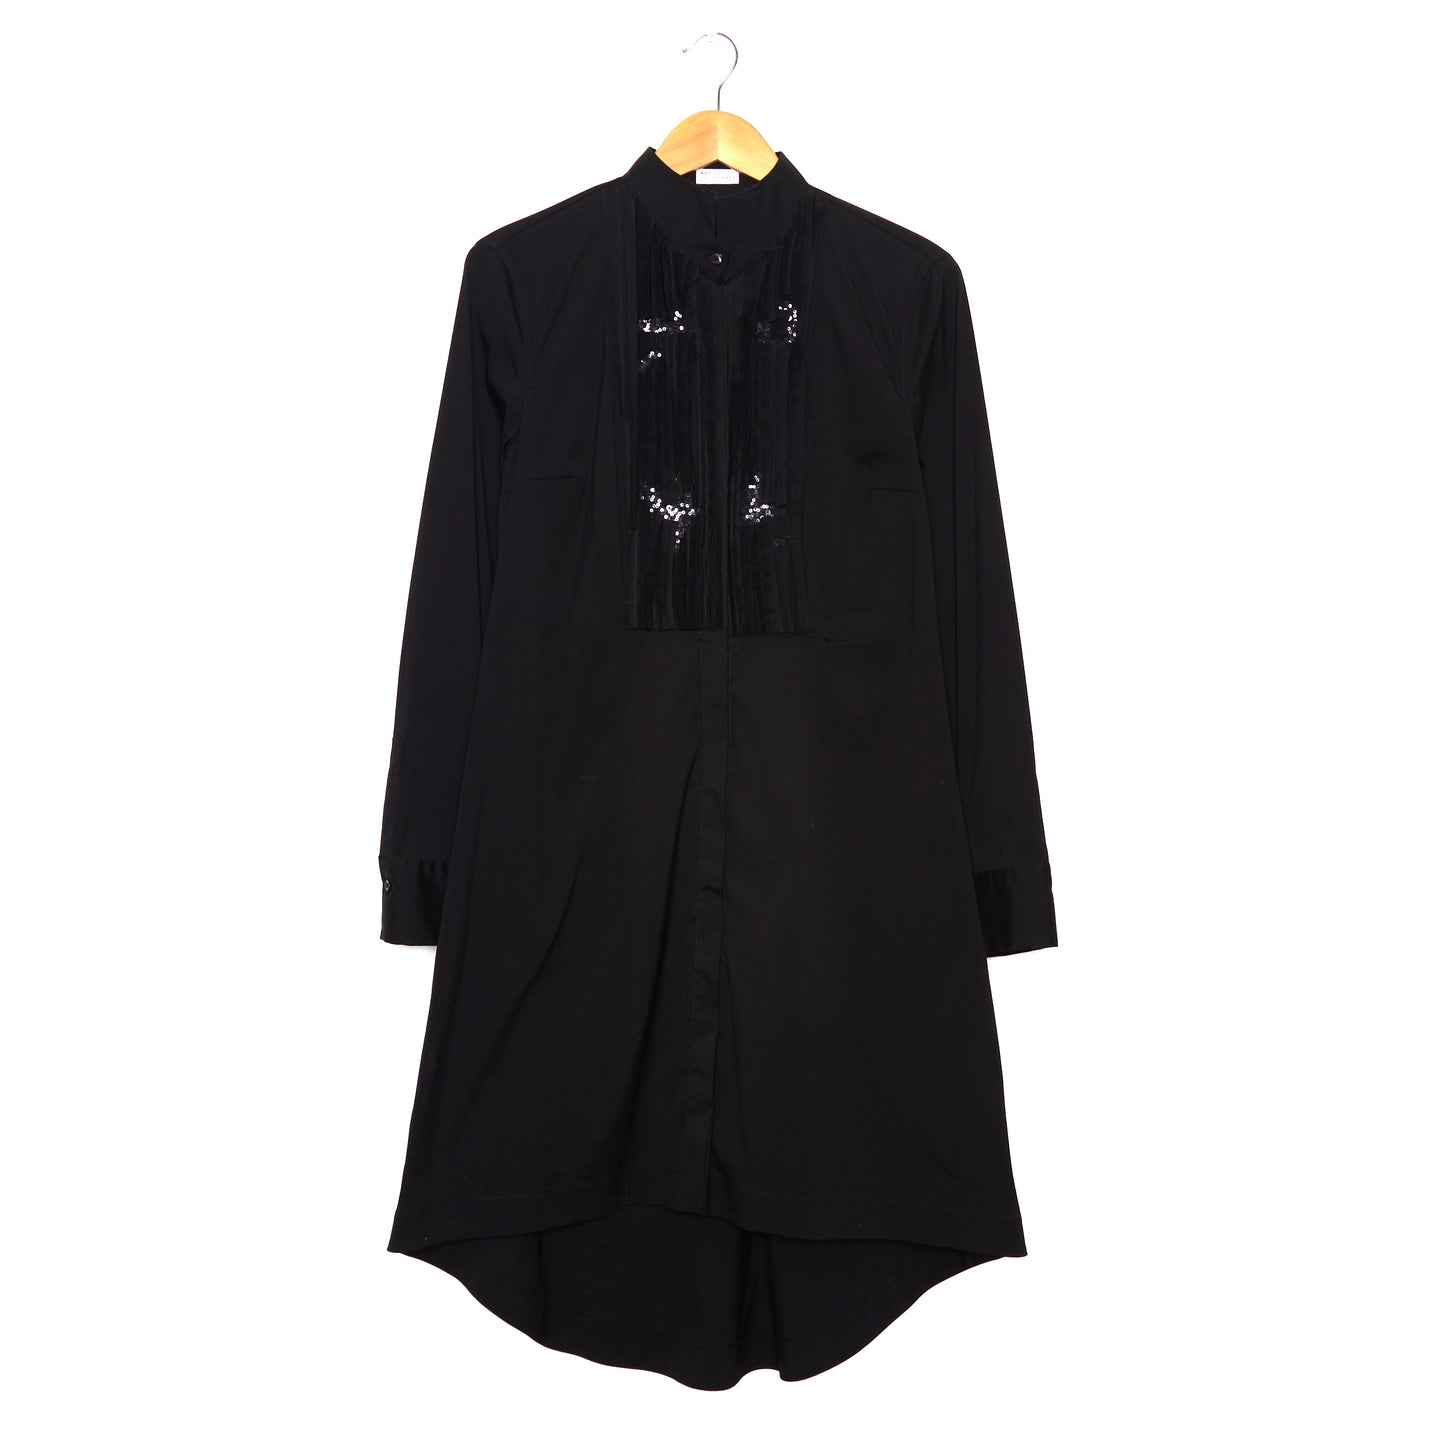 Brunello Cucinelli long sleeve black sequin button down dress with frills.